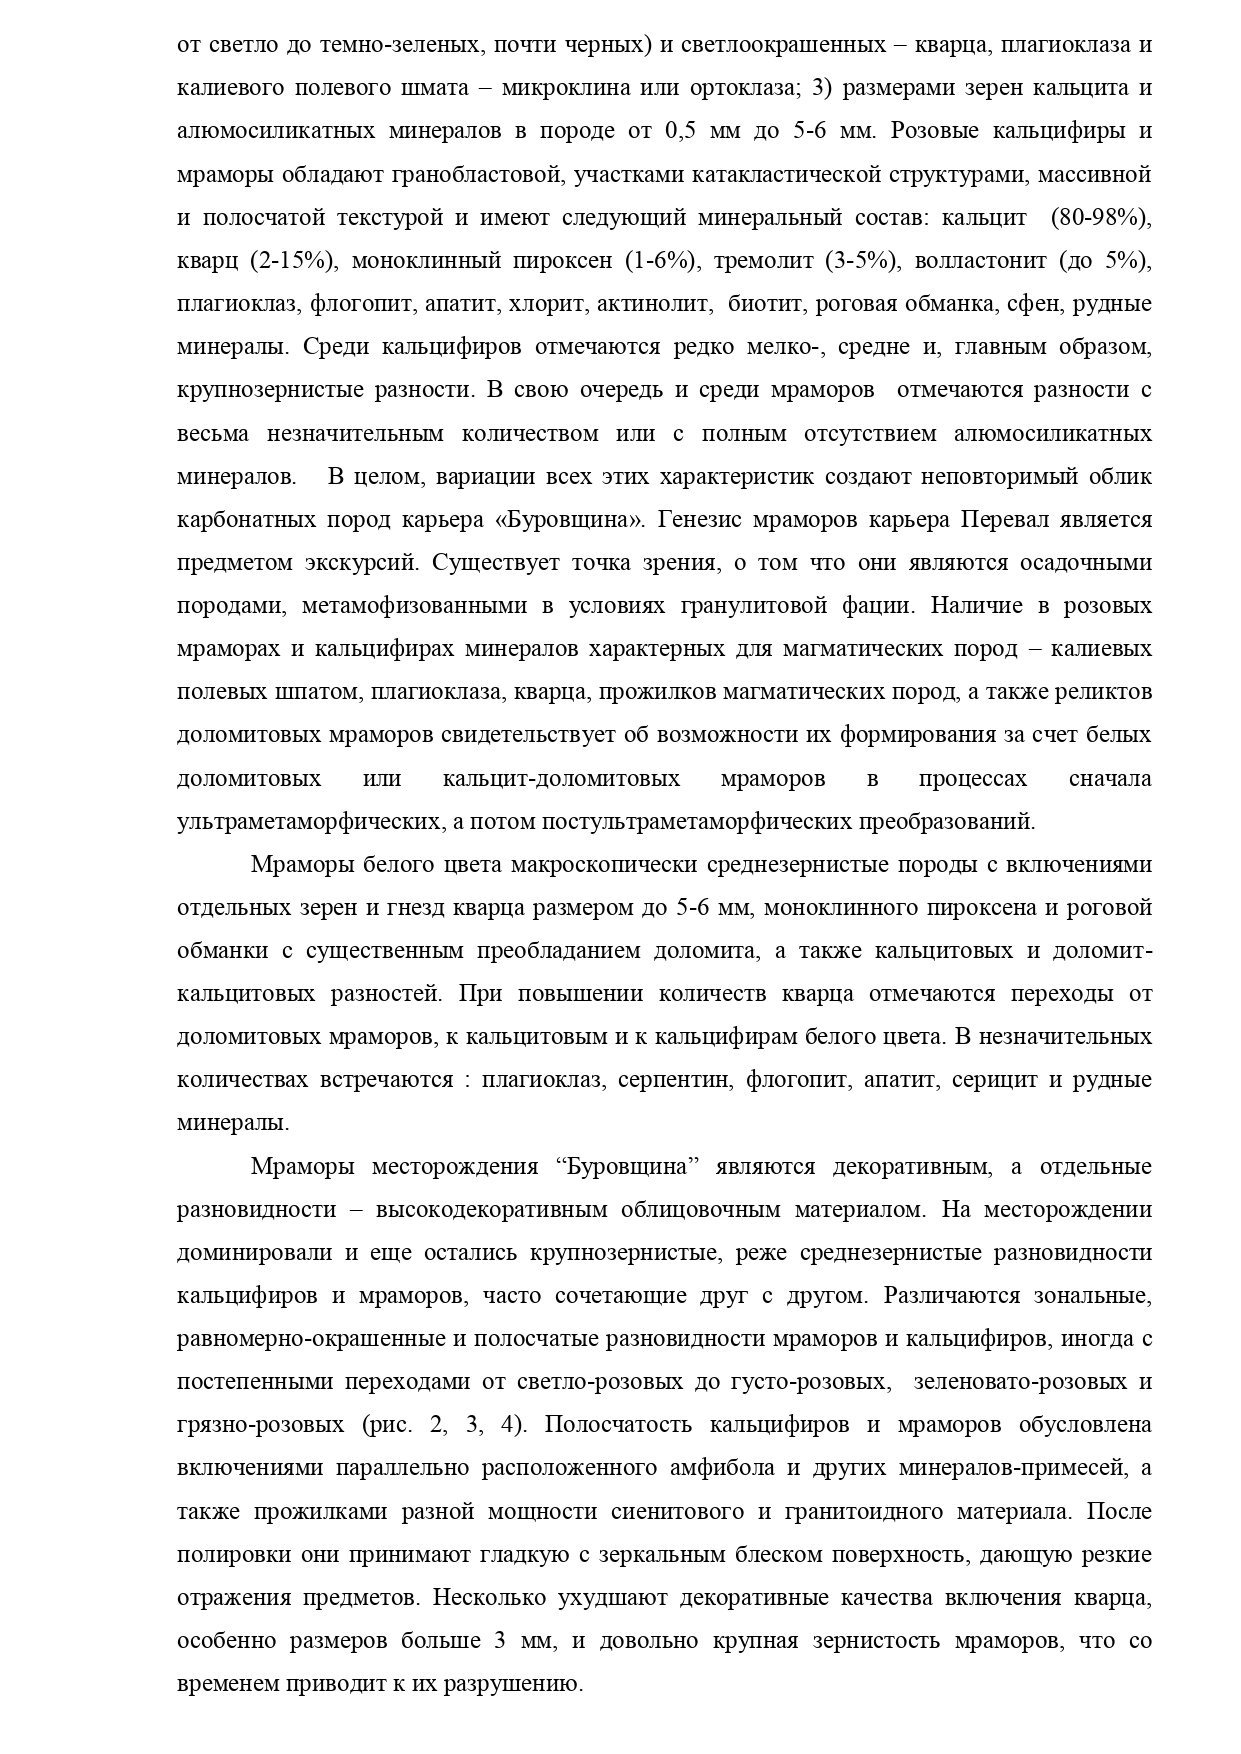 11Мраморы pages to jpg 0003